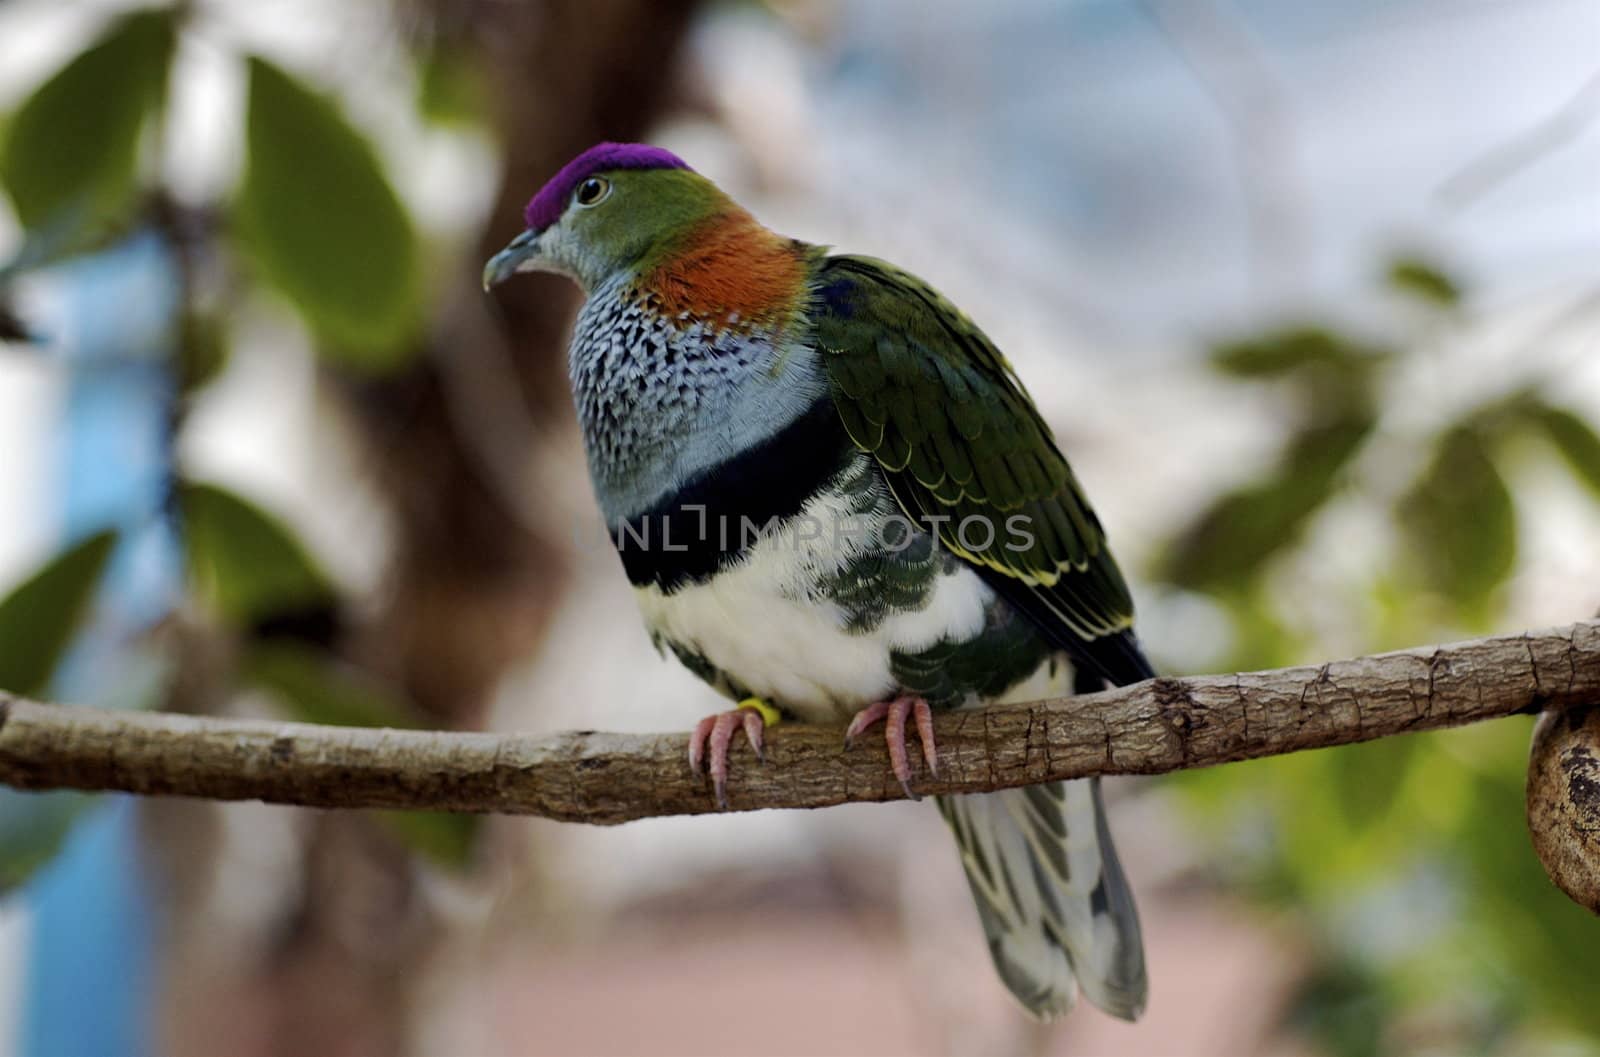 Multicolored tropical bird perched on a branch